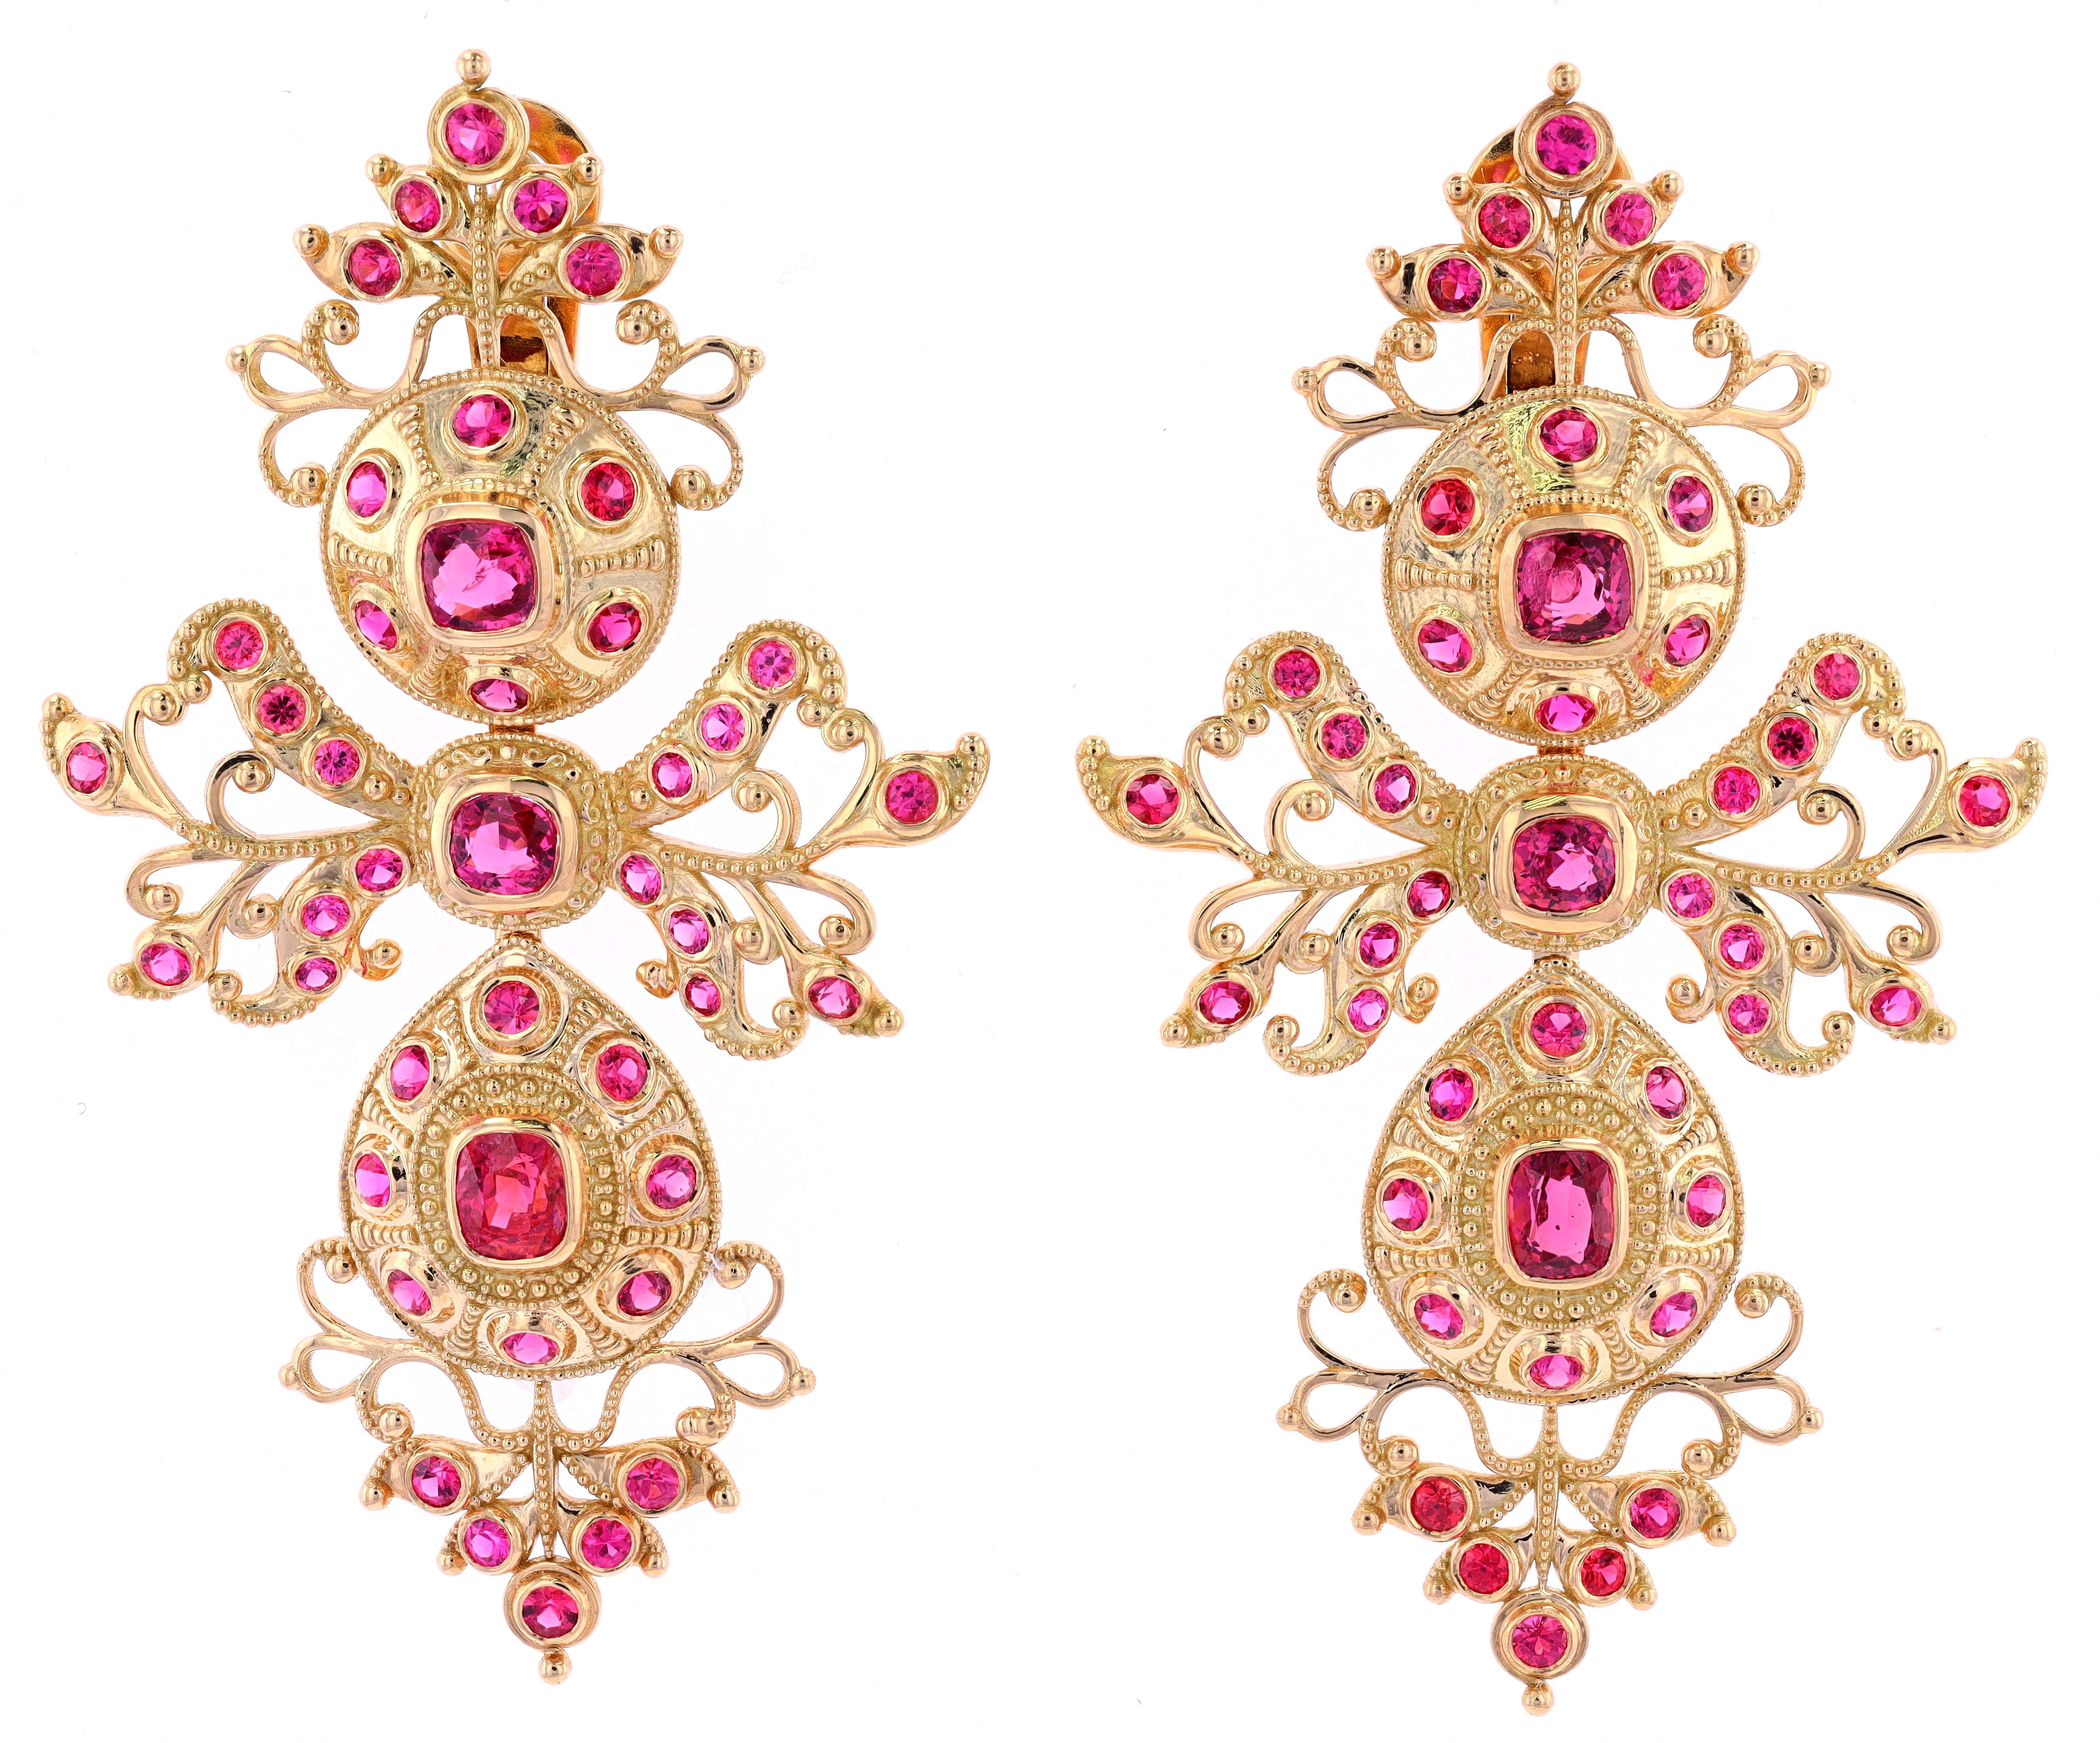 Inspired by Iberian jewelry of the 18th century, these earrings are set with cushion and circular-cut spinel, mounted in 18K gold. The earrings are richly textured and dramatic. 

If you are a Bridgerton, The Crown or a Downton Abbey fan, these are